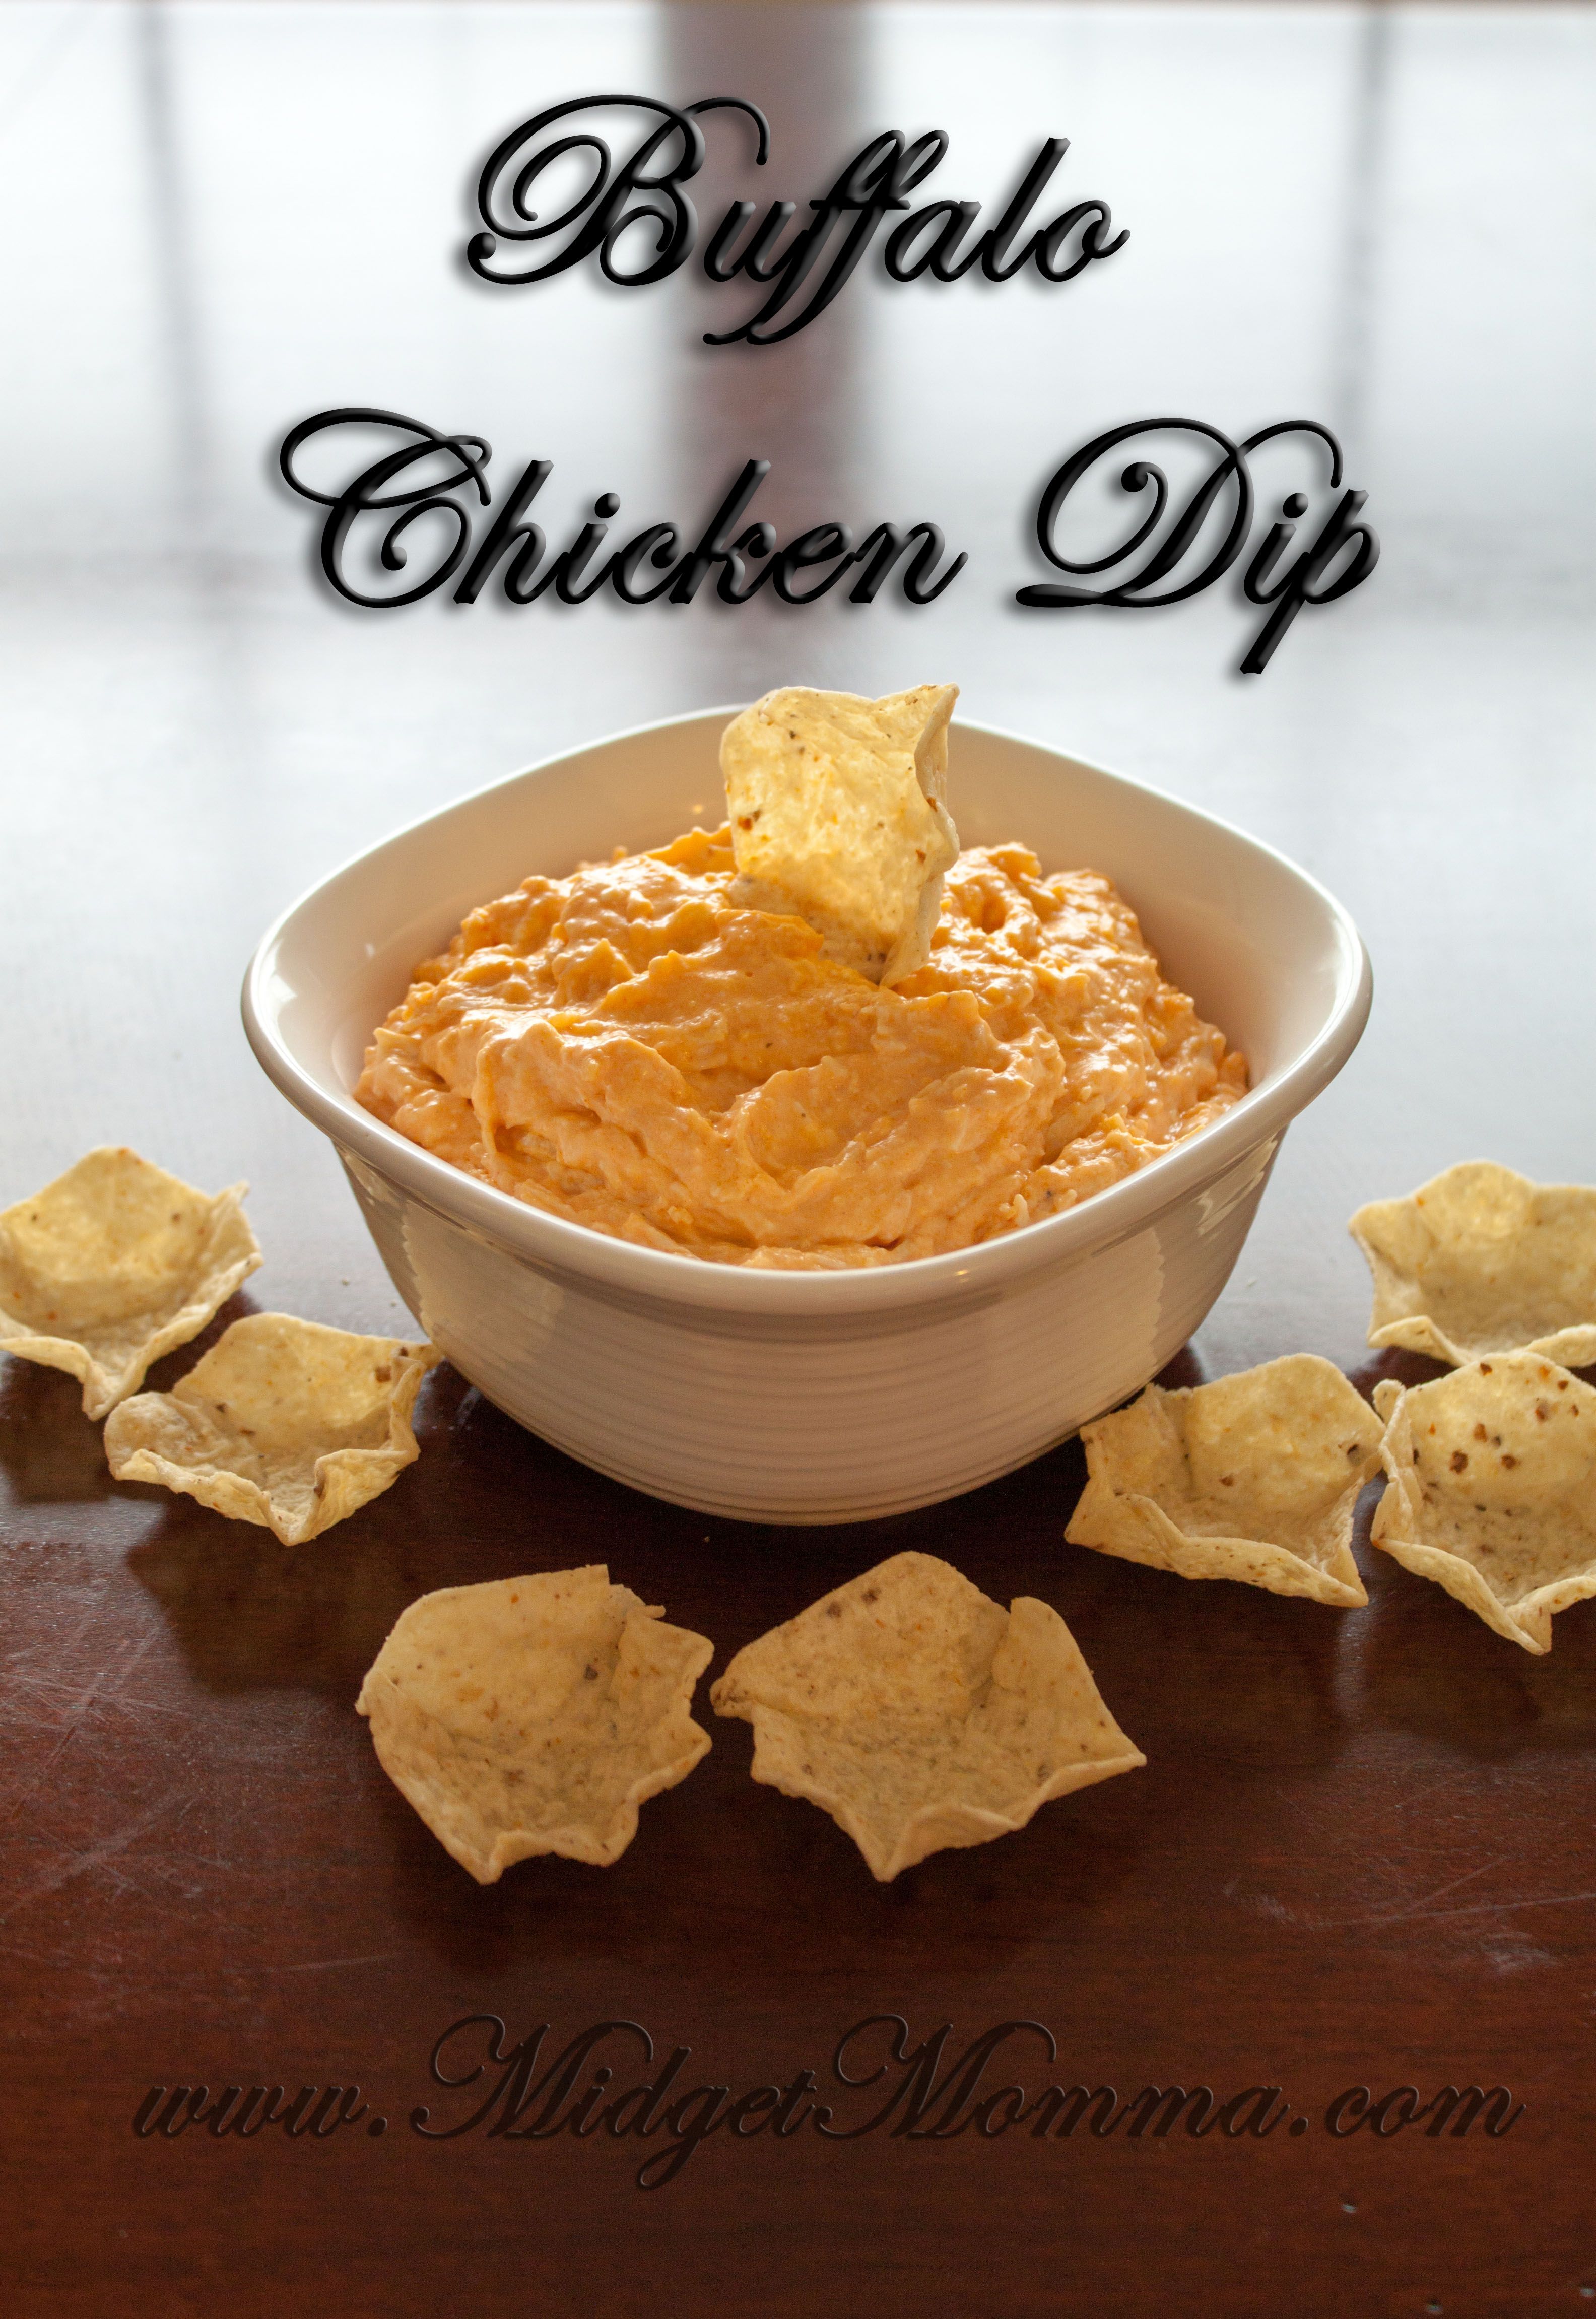 Crockpot Buffalo Chicken Dip Recipe!!!! Seriously about the best dip in the whole entire world.. I could eat it all day everyday..